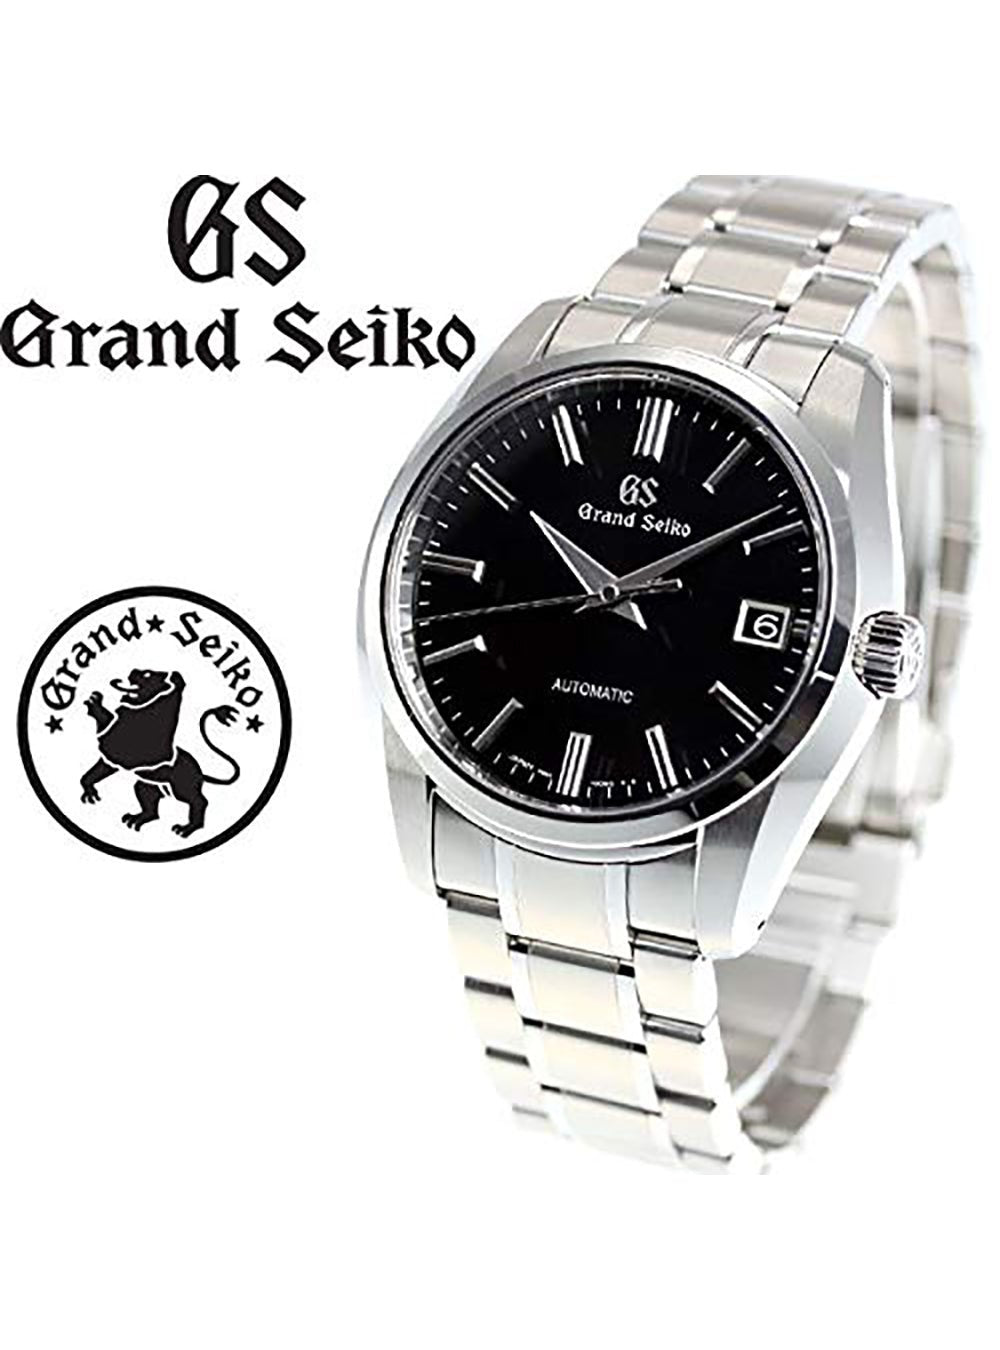 Grand Seiko Heritage Collection SBGR317 MADE IN JAPAN JDM